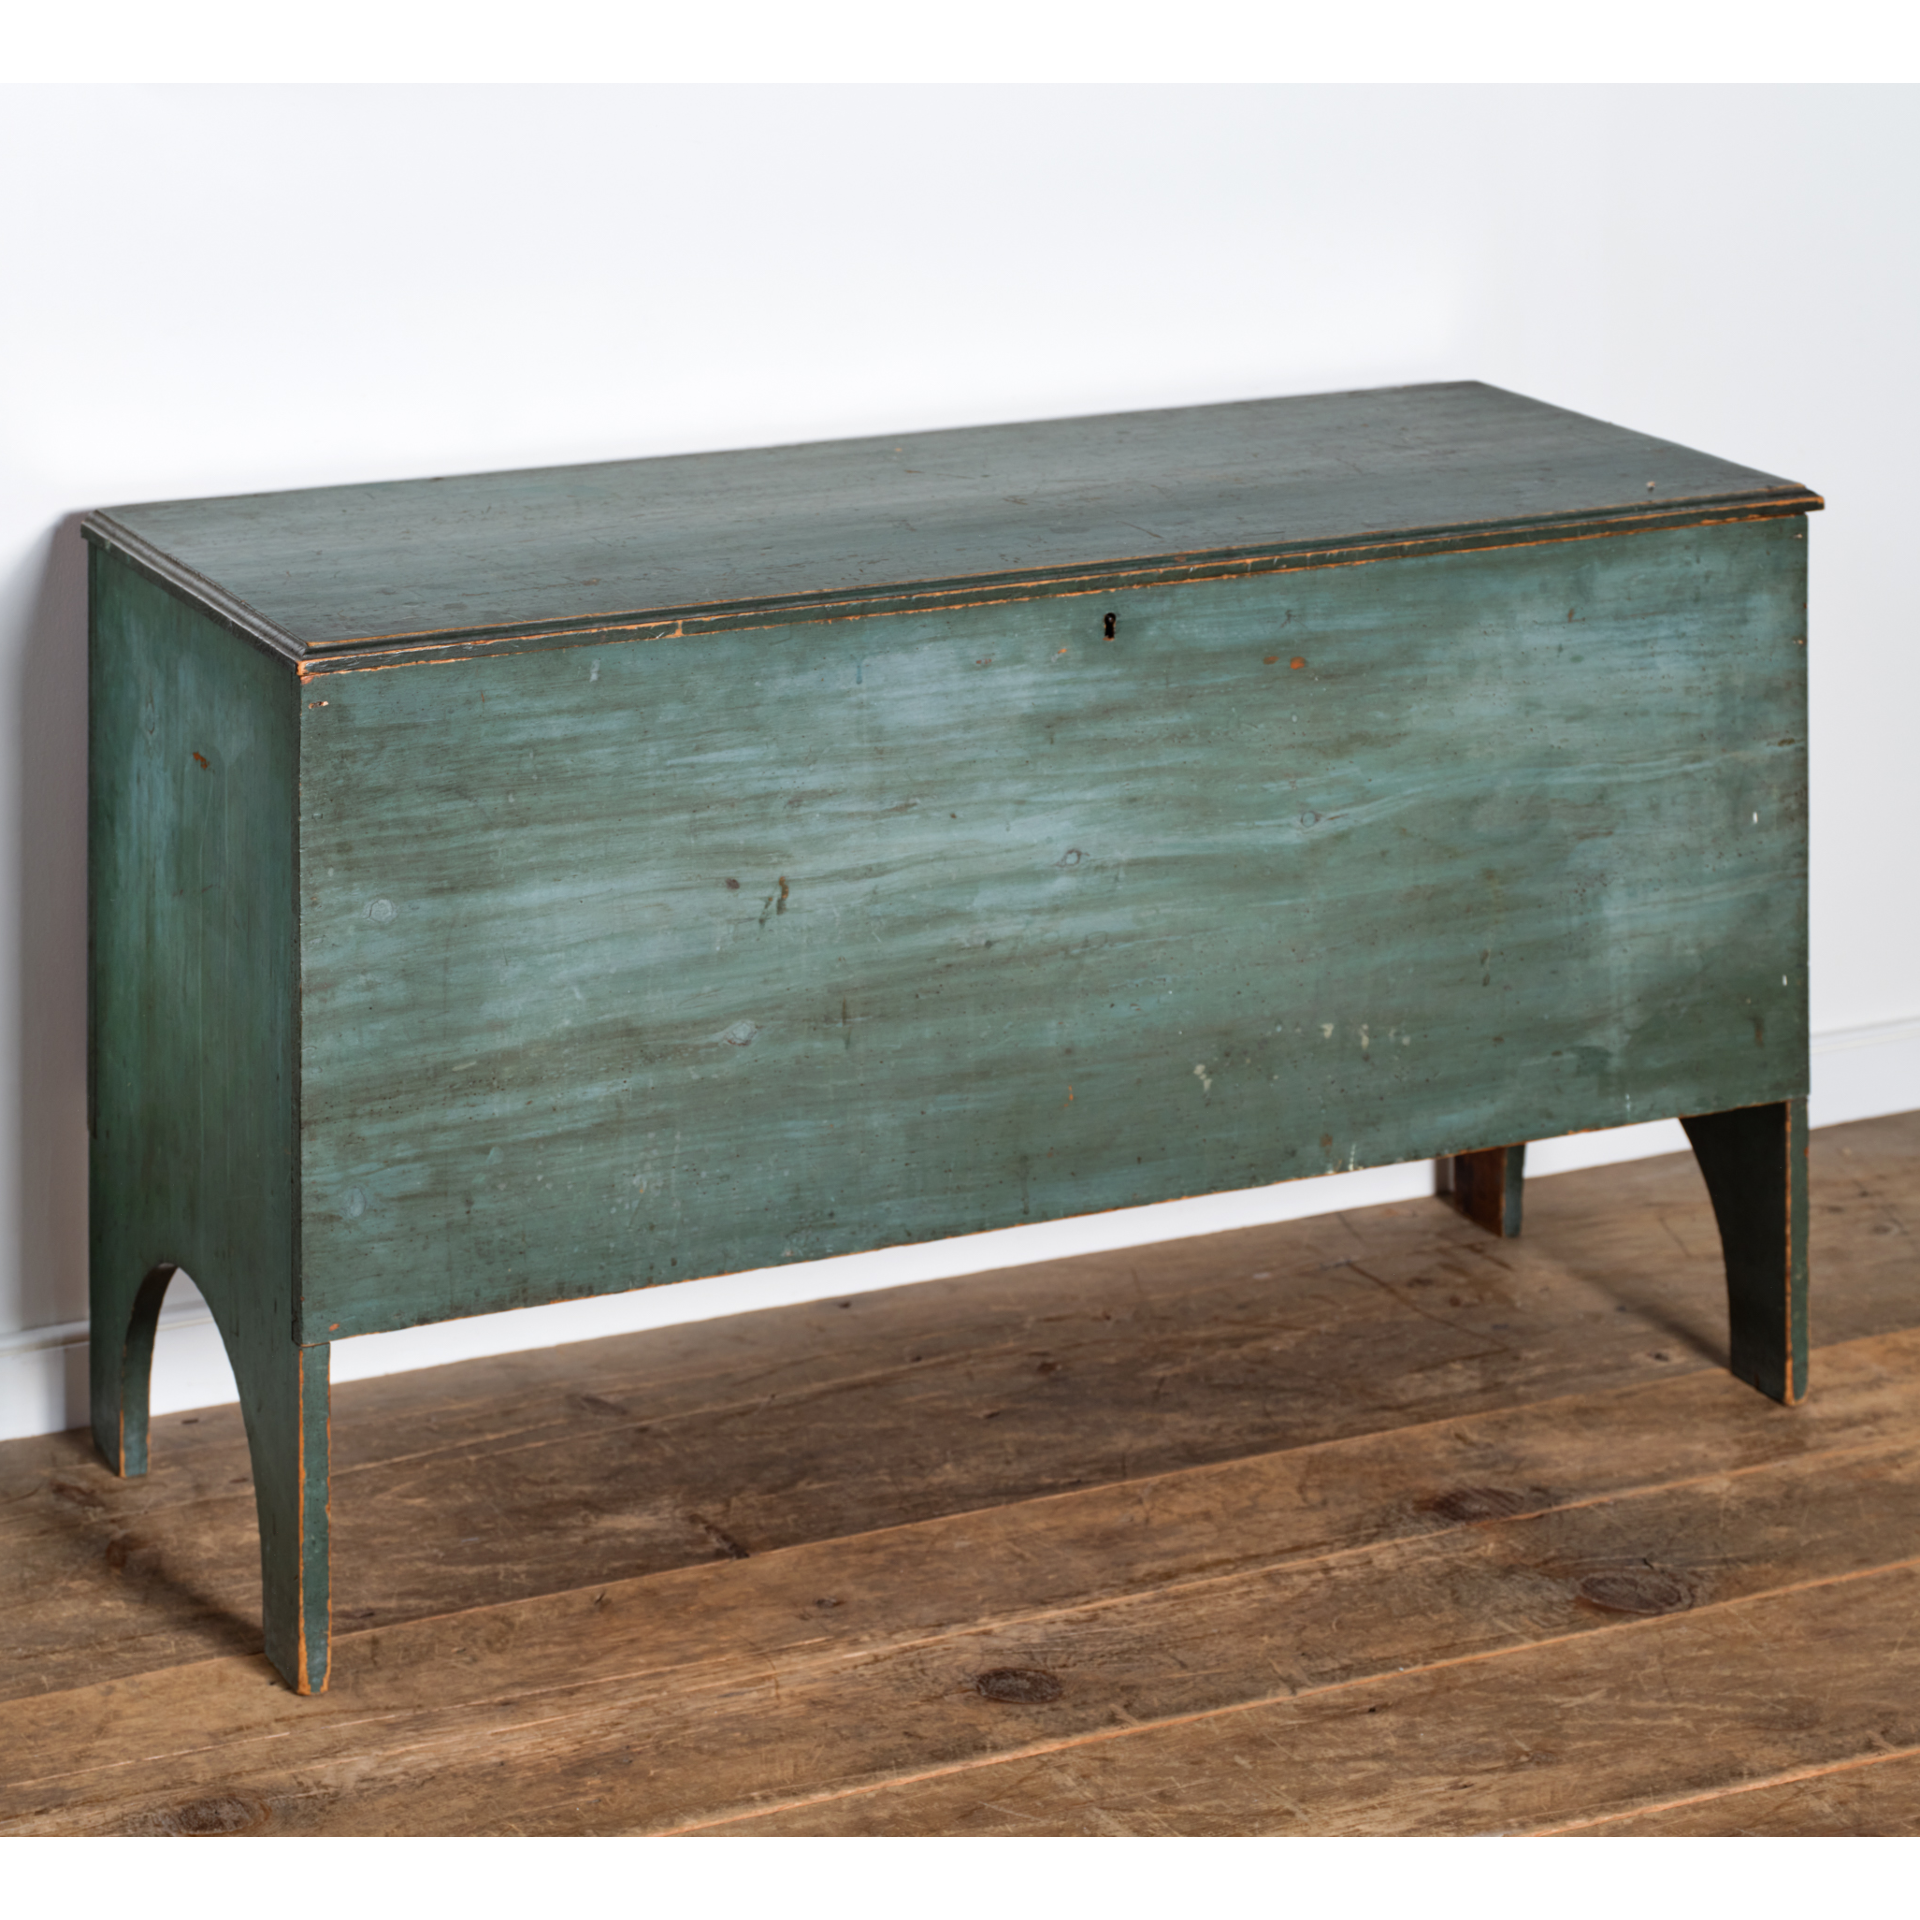 teal painted blanket chest rel=